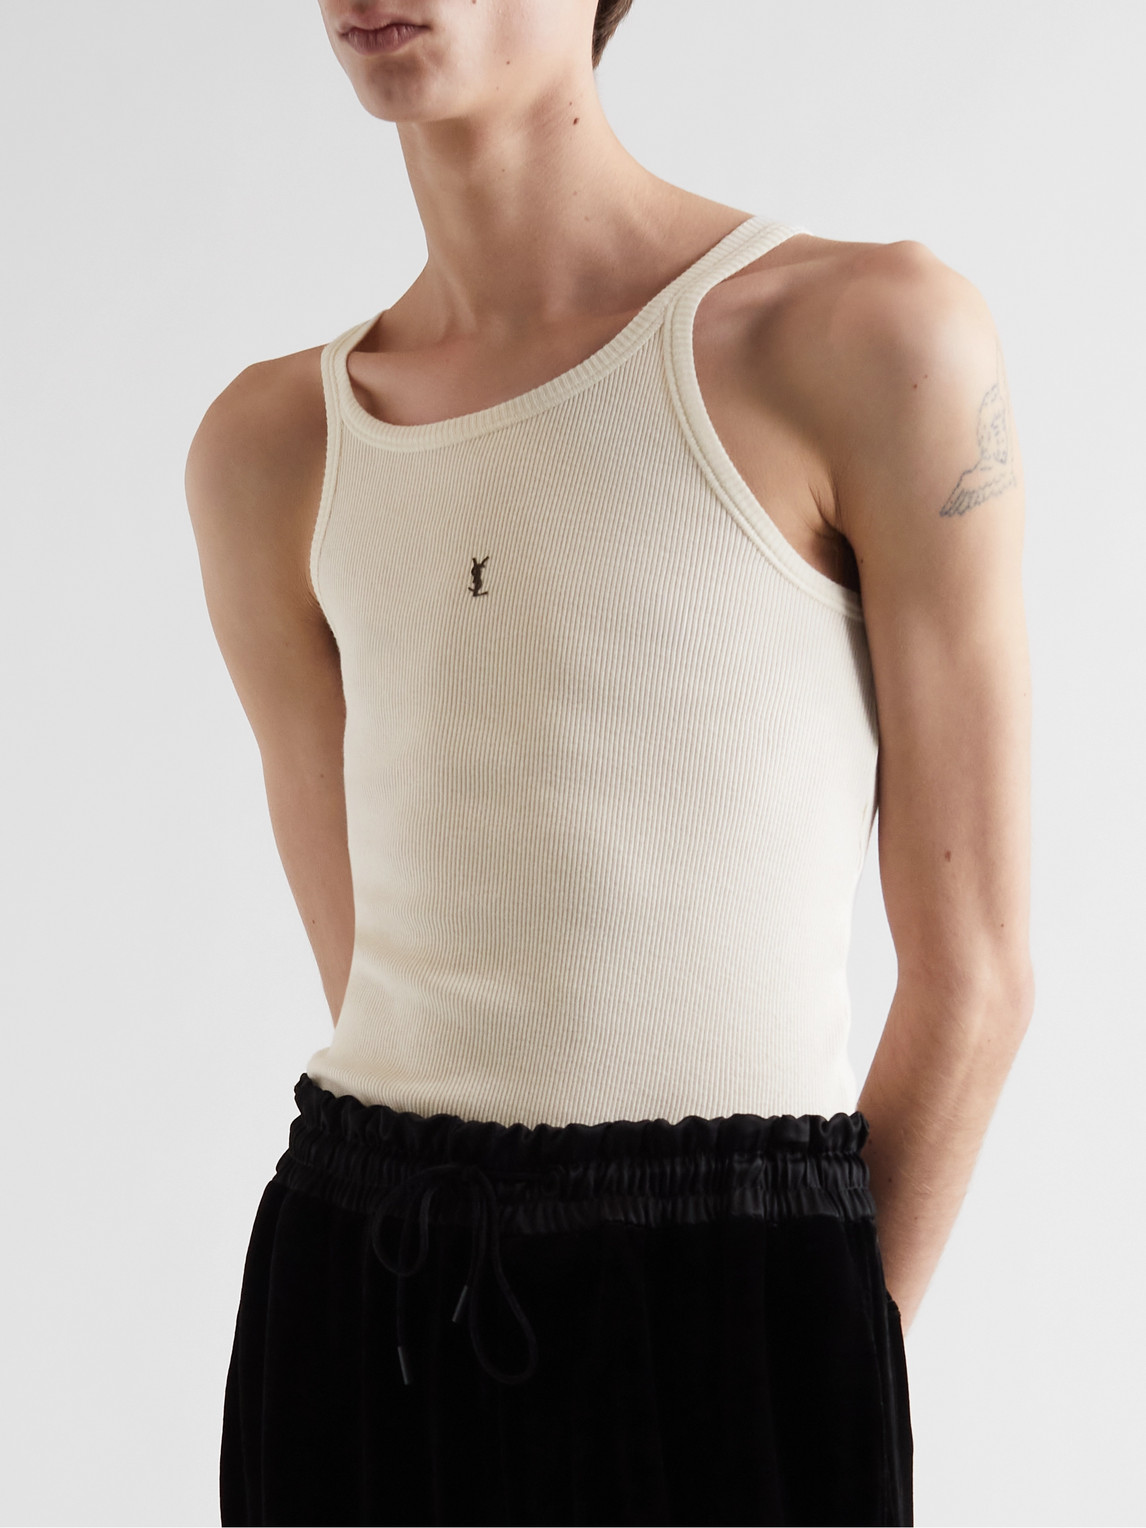 Shop Saint Laurent Slim-fit Logo-embroidered Ribbed Cotton-jersey Tank Top In Neutrals